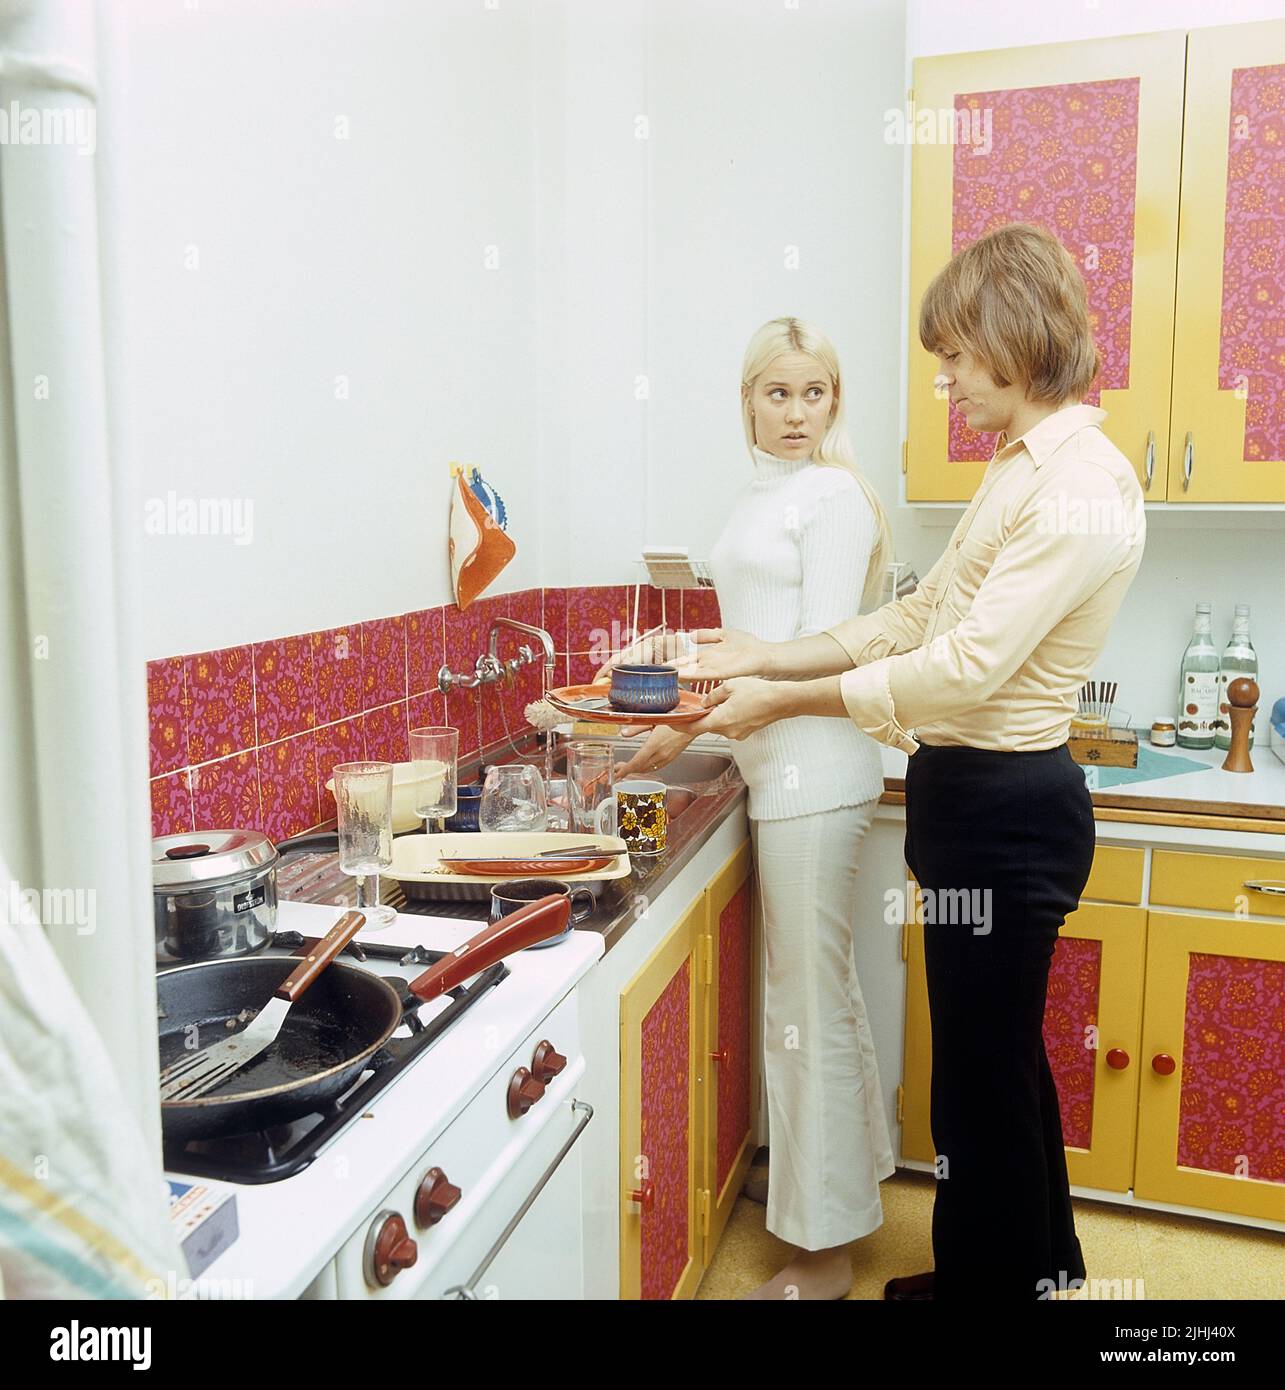 ABBA. Agnetha Fältskog. Singer. Member of the pop group ABBA. Born 1950. Pictured here at home with her fiancé Björn Ulvaeus 1970 whom she married on 6 July 1971. The kitchen-sink is full of plates and glasses and it looks as if the argue over who should clean it up. Stock Photo